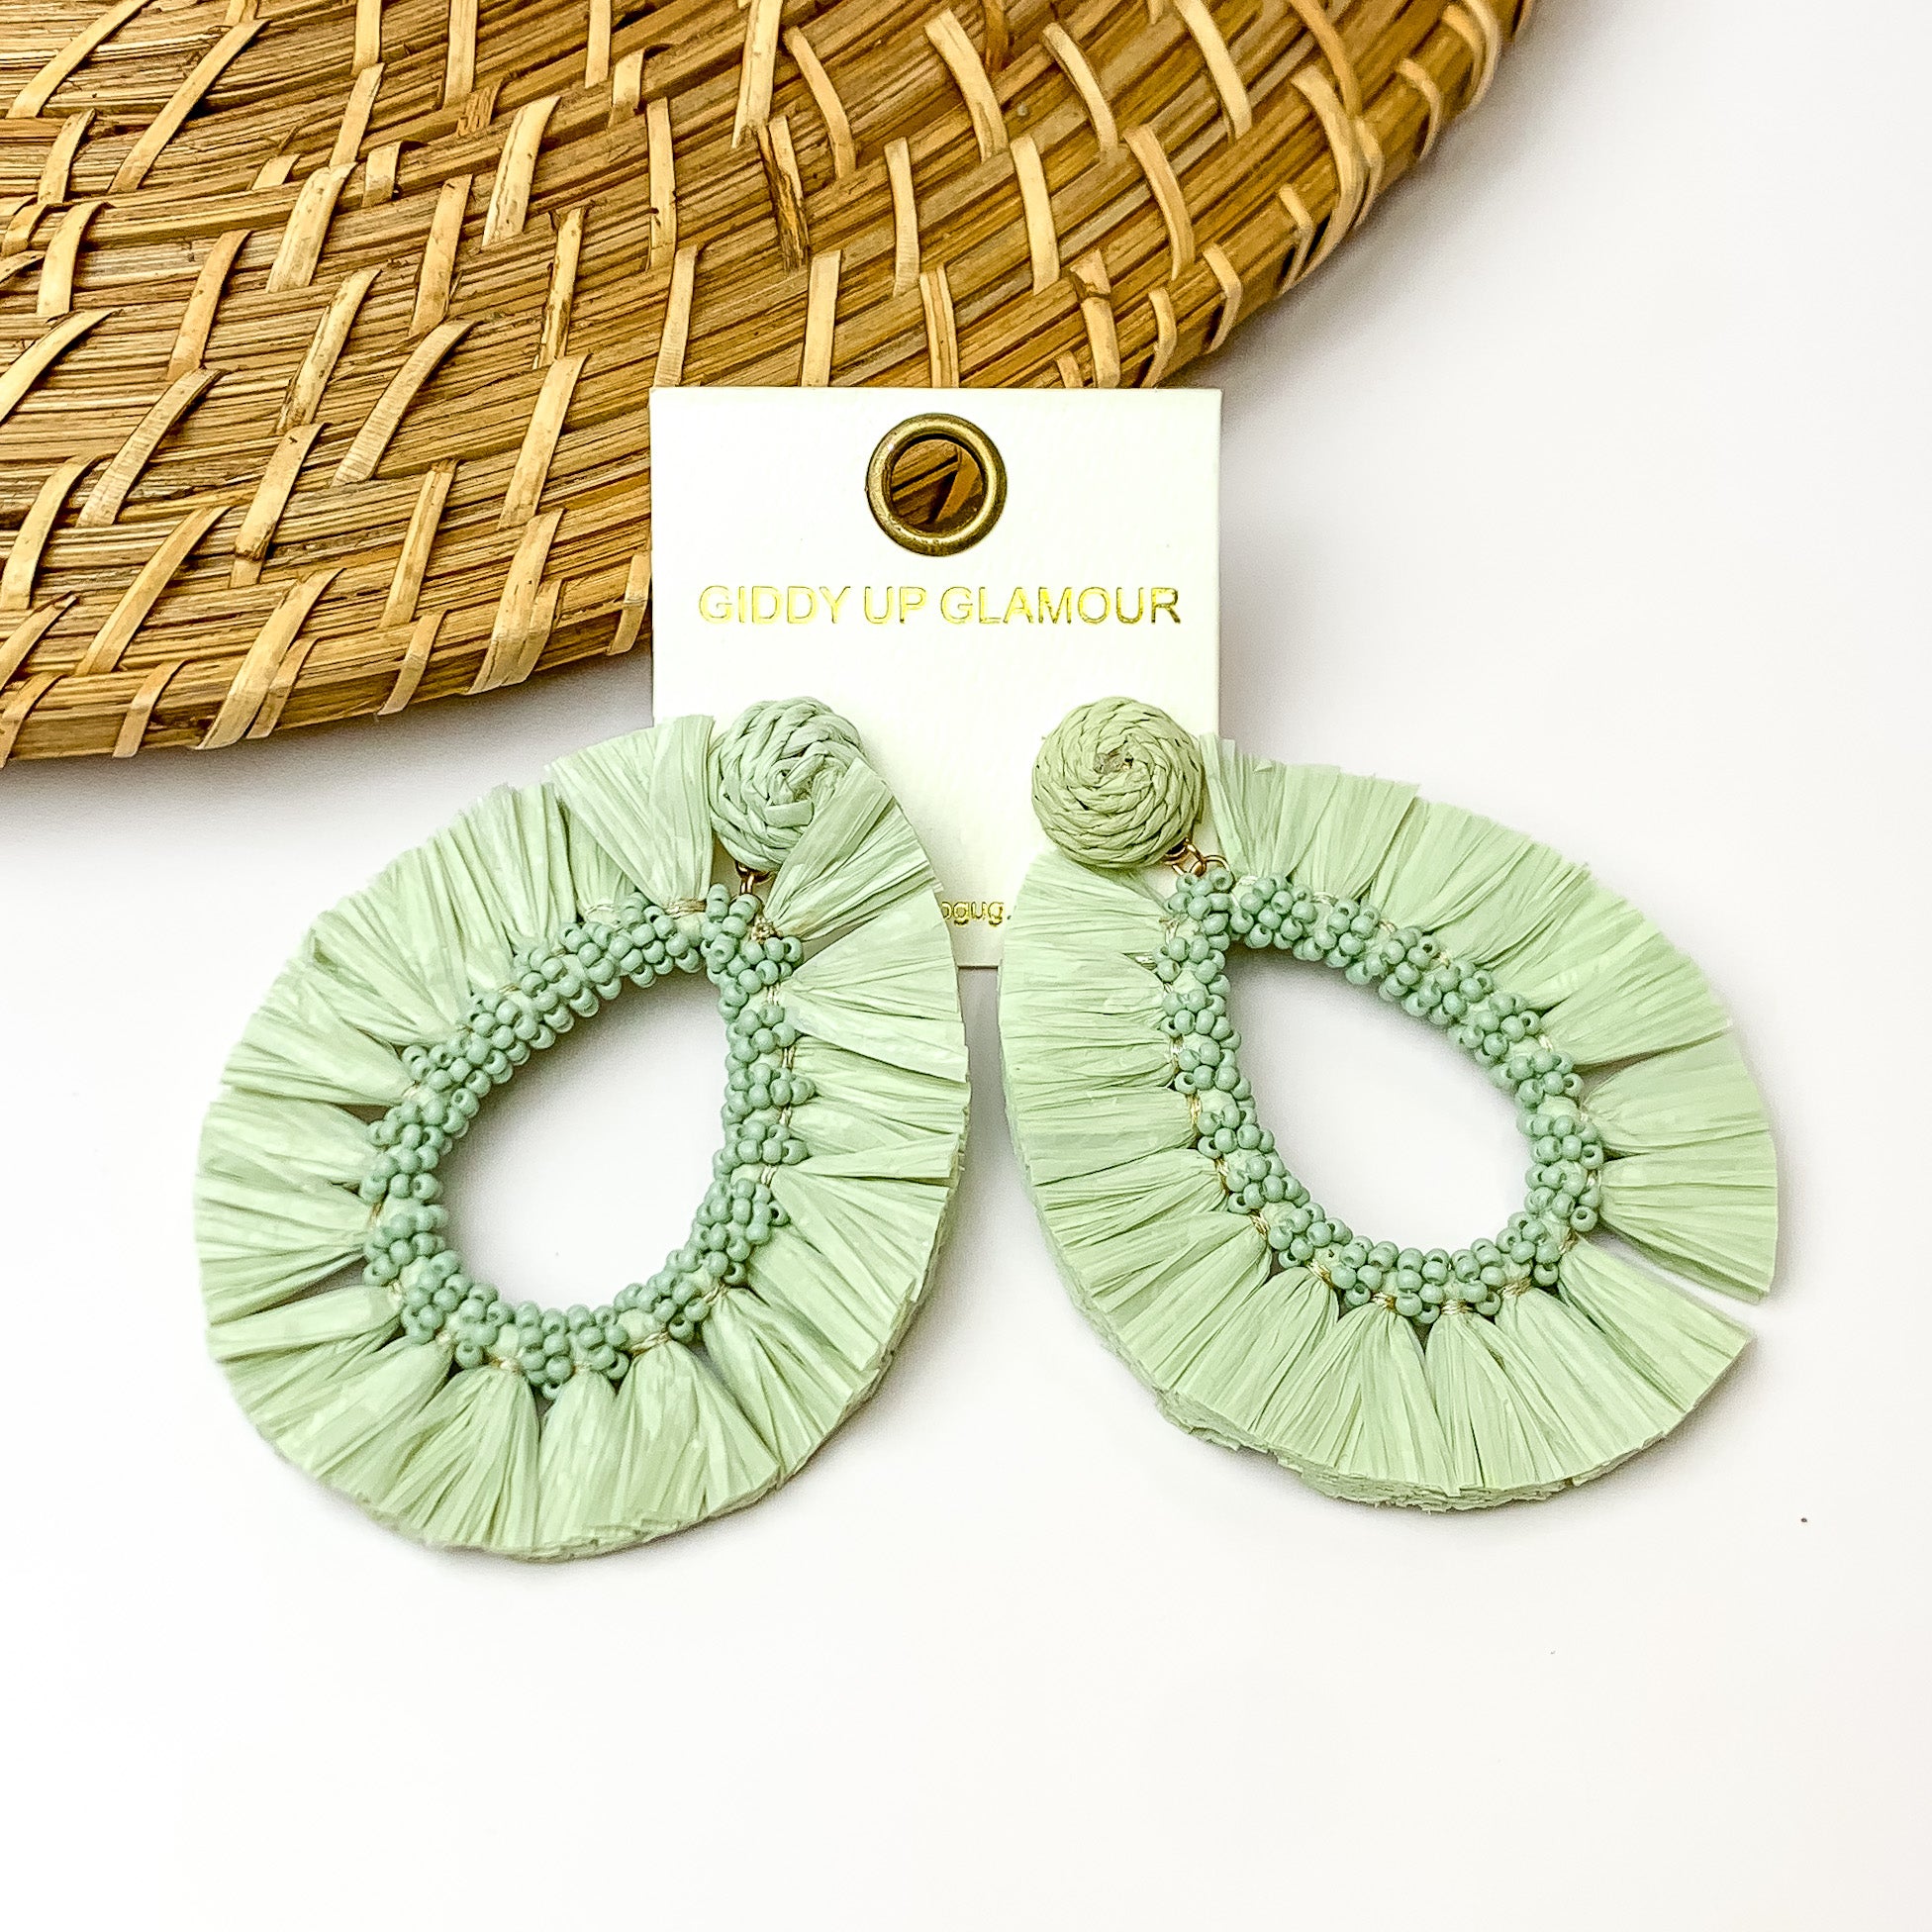 Mint green fringe open drop hoop earrings. Pictured with a white background and wood like decoration in the top left corner.